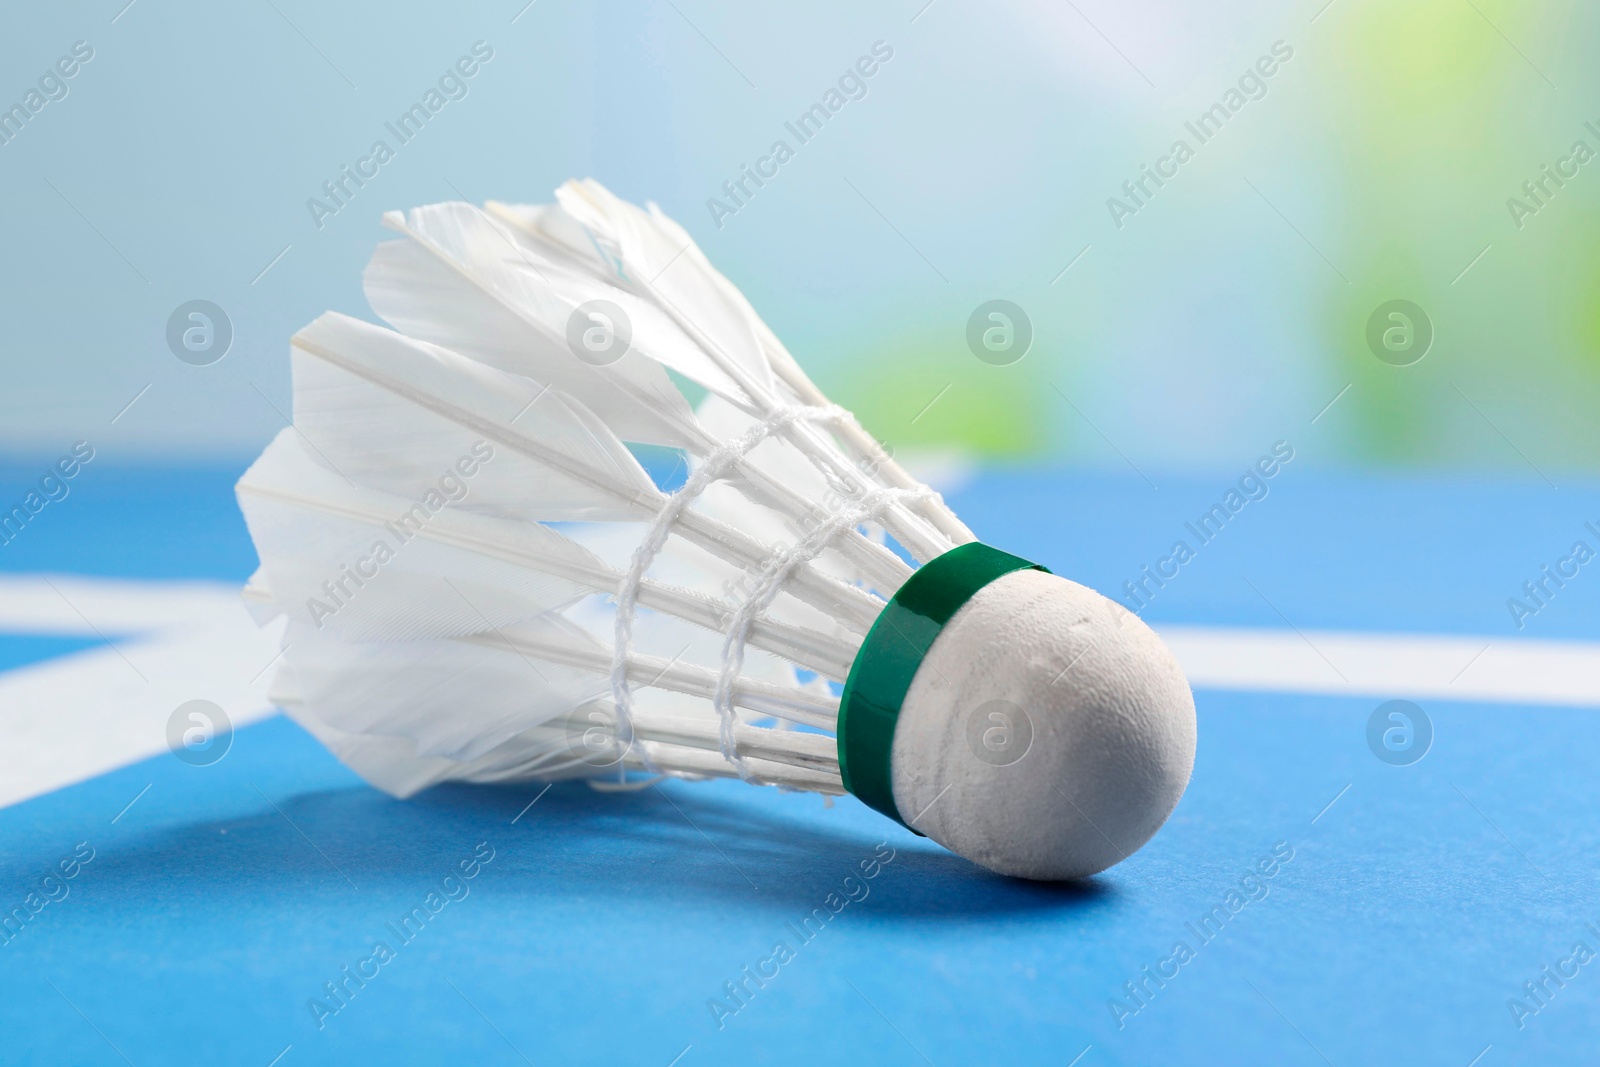 Photo of Feather badminton shuttlecock on blue table against blurred background, closeup